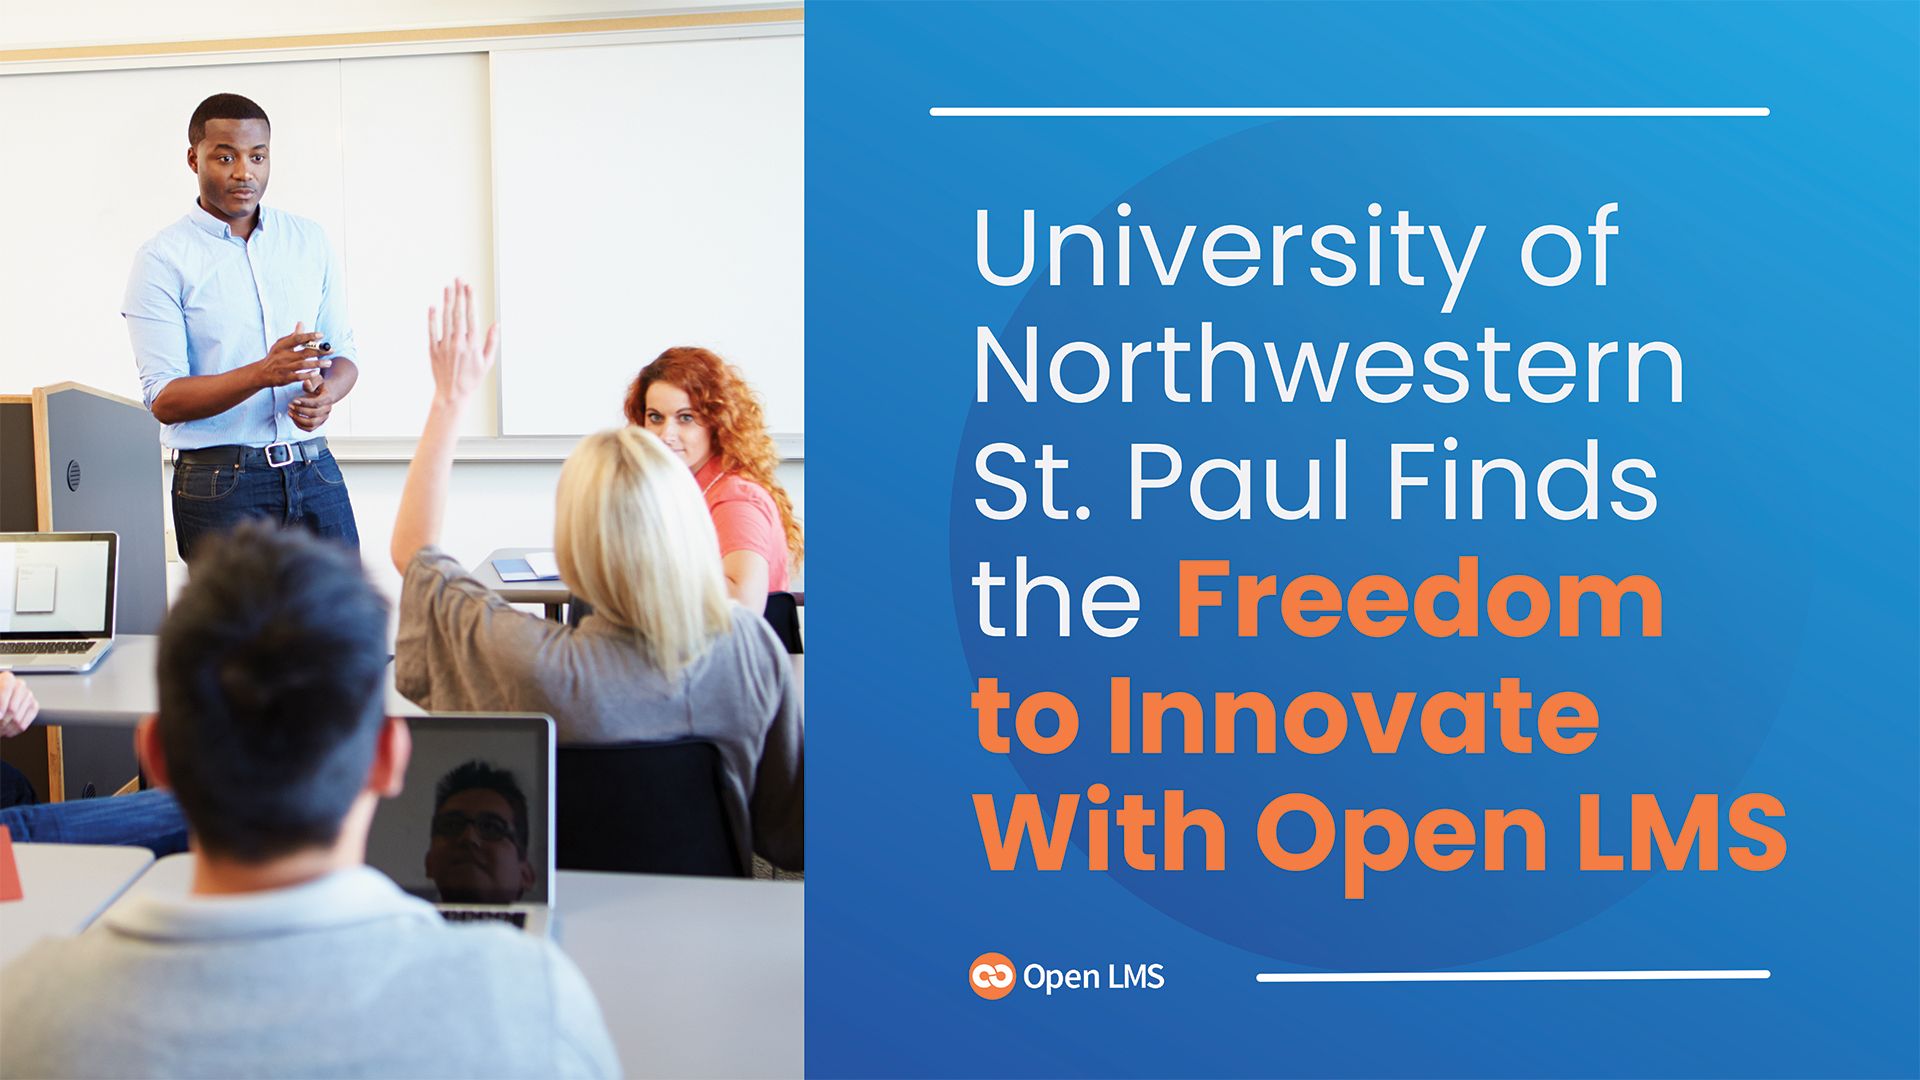 university-of-northwestern-st-paul-finds-the-freedom-to-innovate-with-open-lms